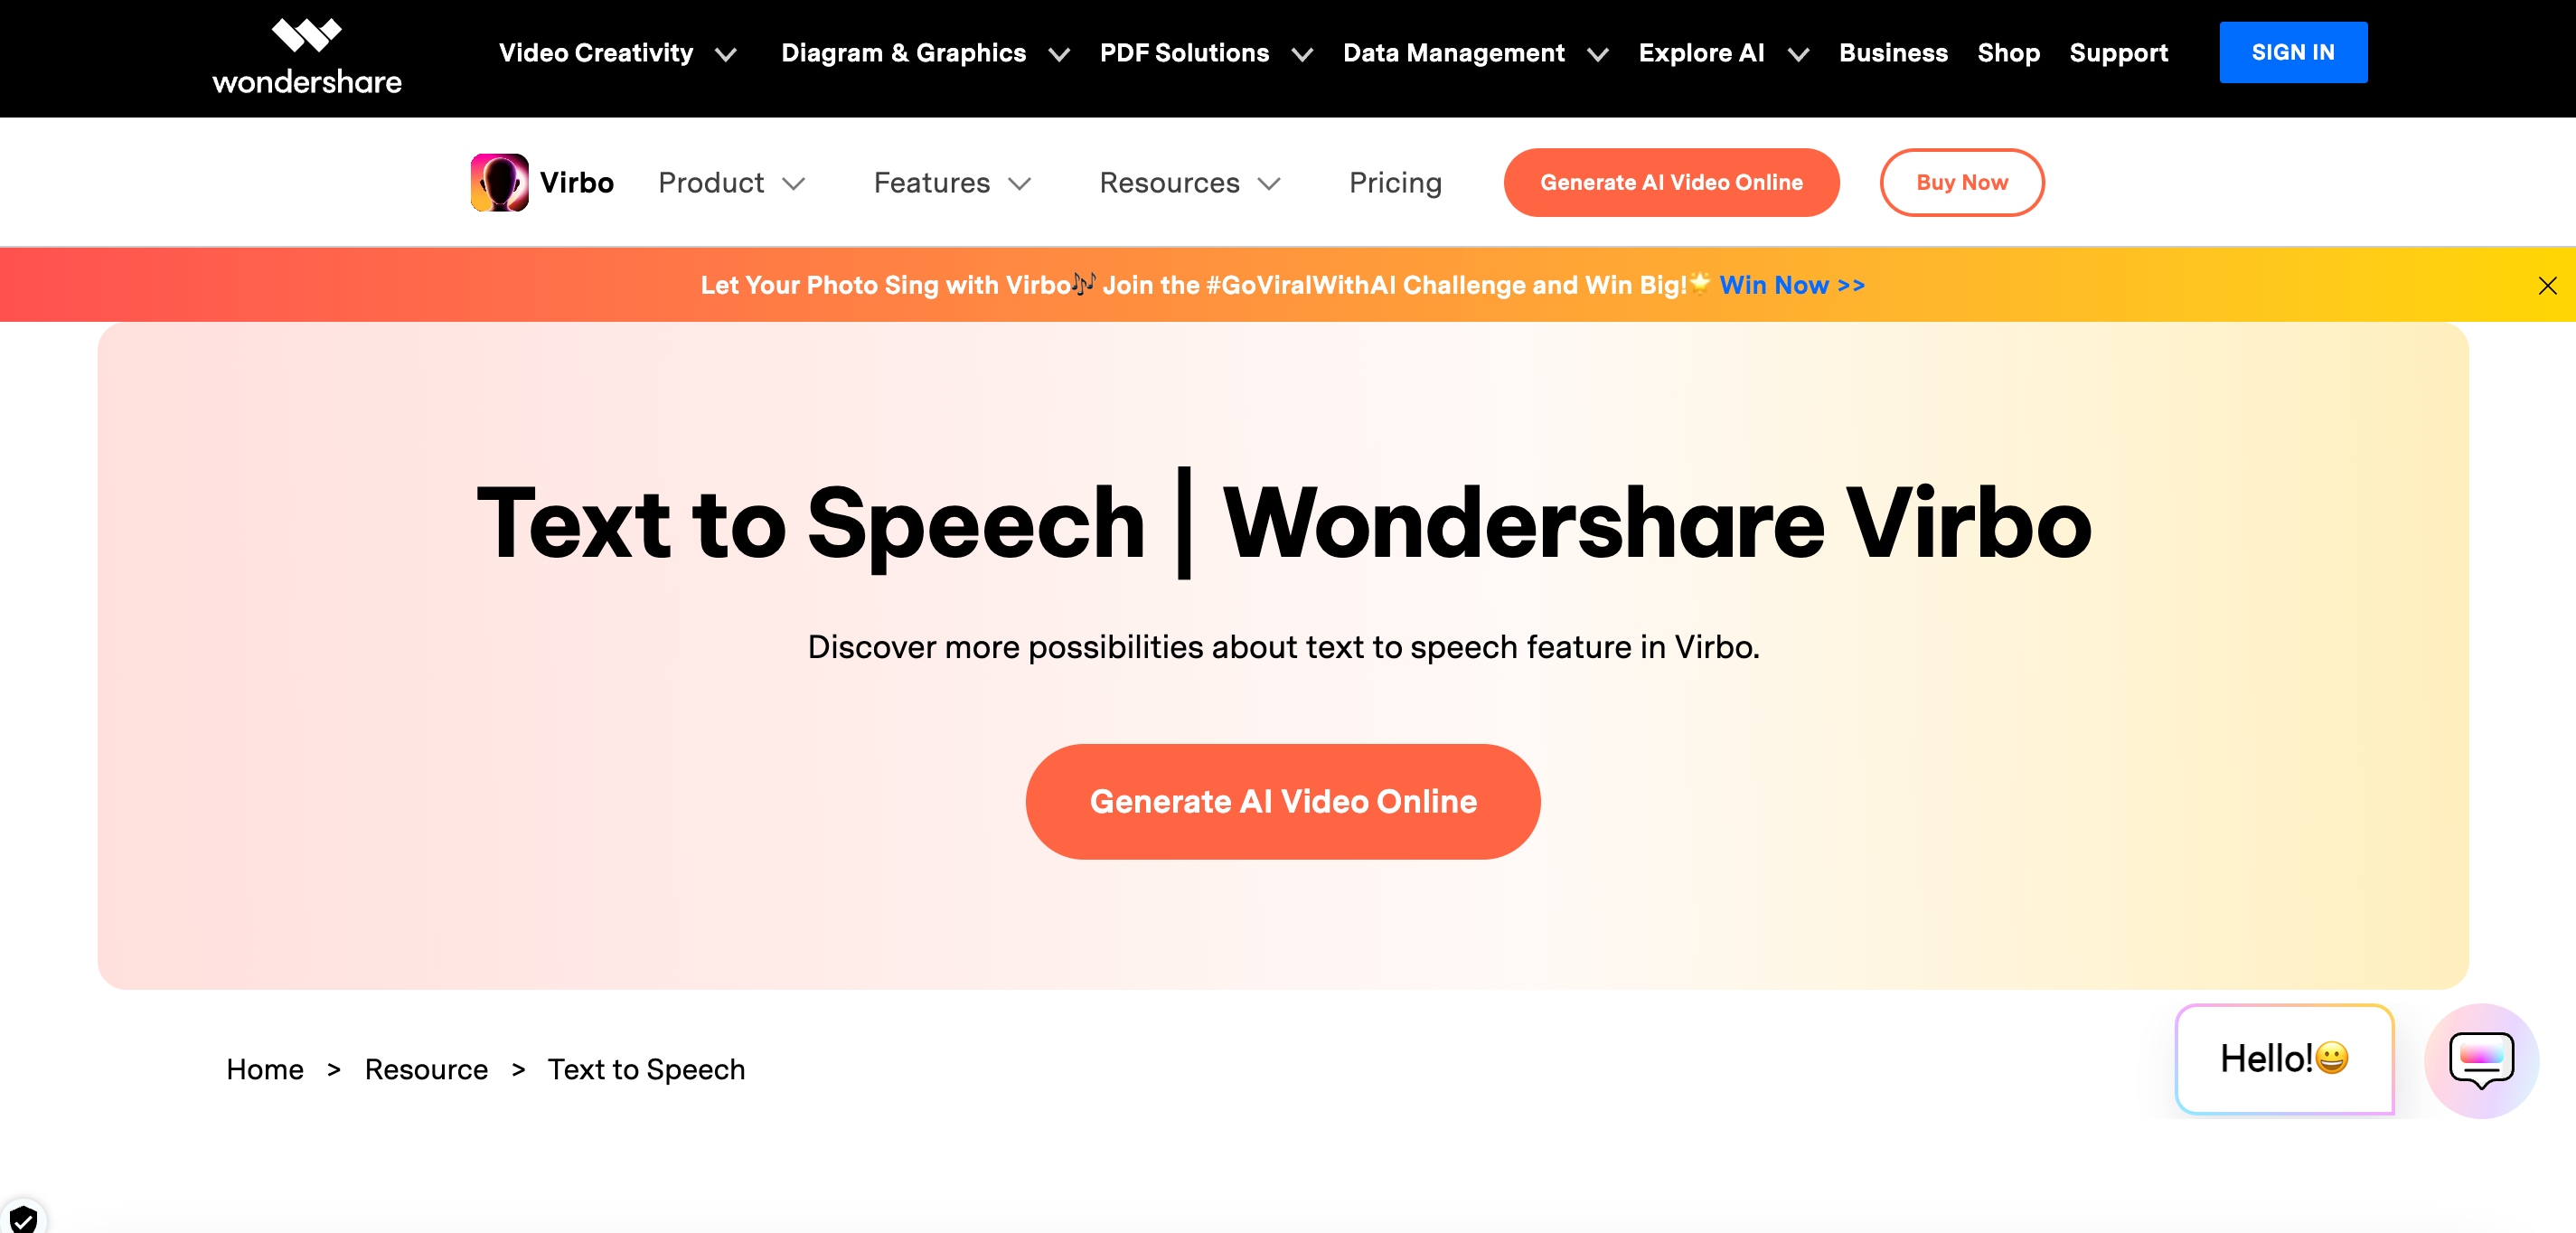 wondershare virbo for text to speech 